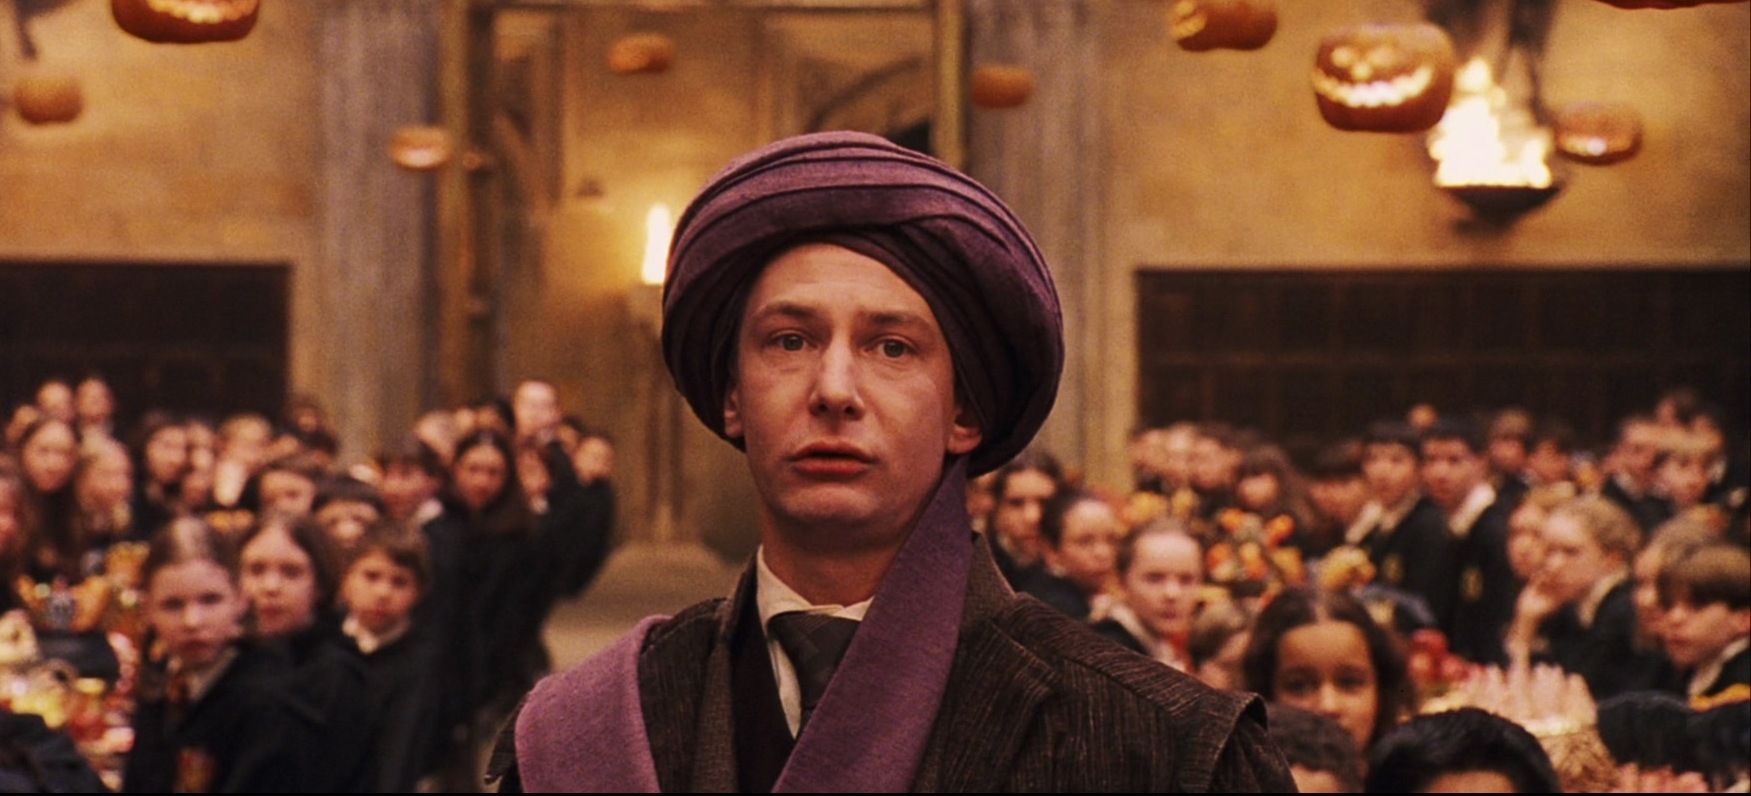 Professor Quirrell informs Dumbledore about the troll.